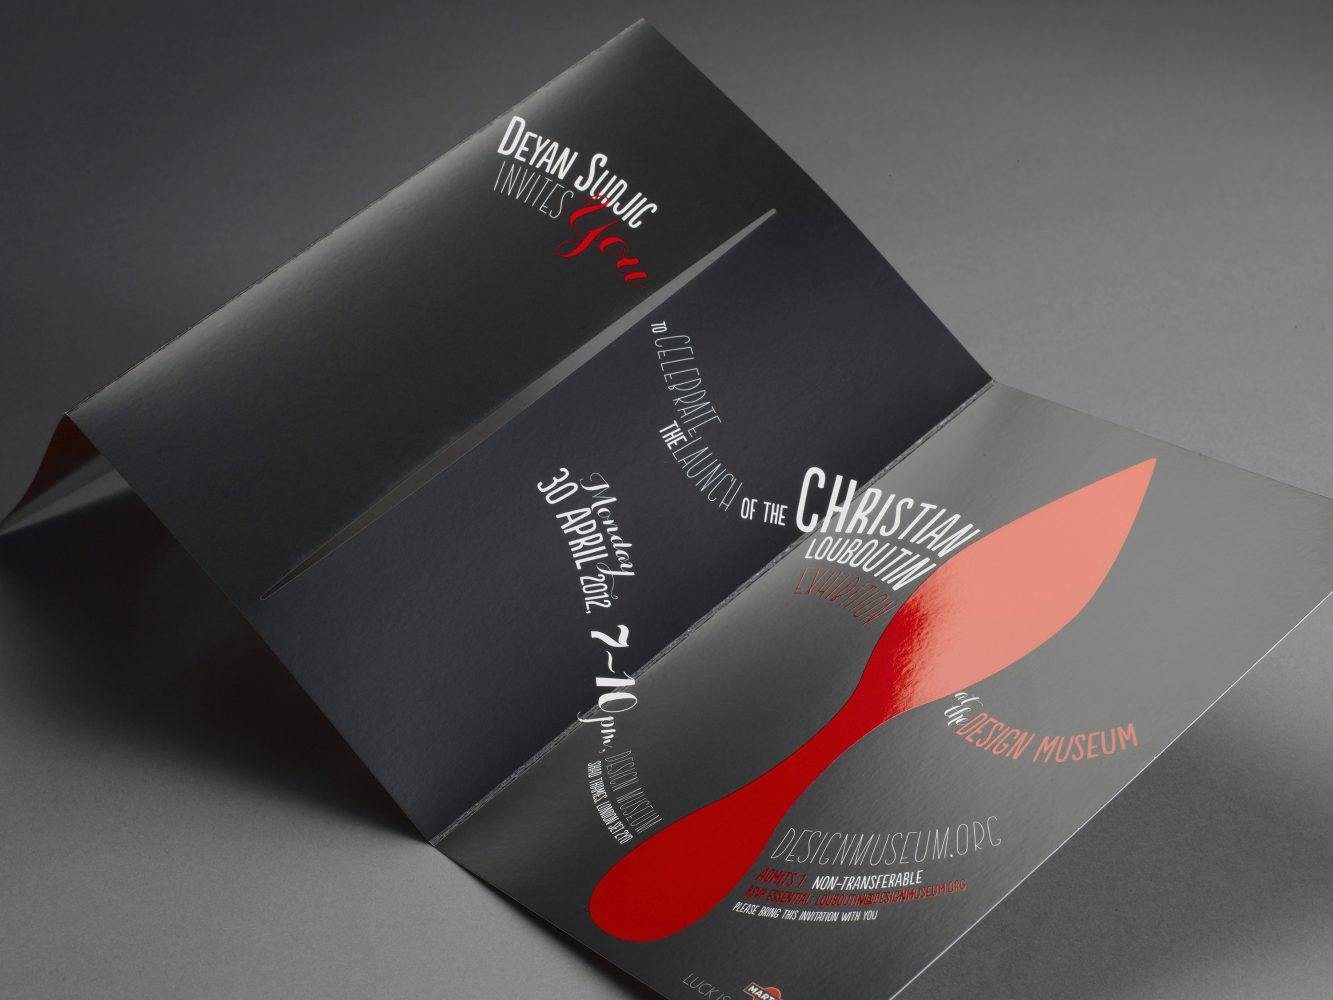 Brochure for London Design Museum’s Christian Louboutin exhibition, brand experience design by Household.